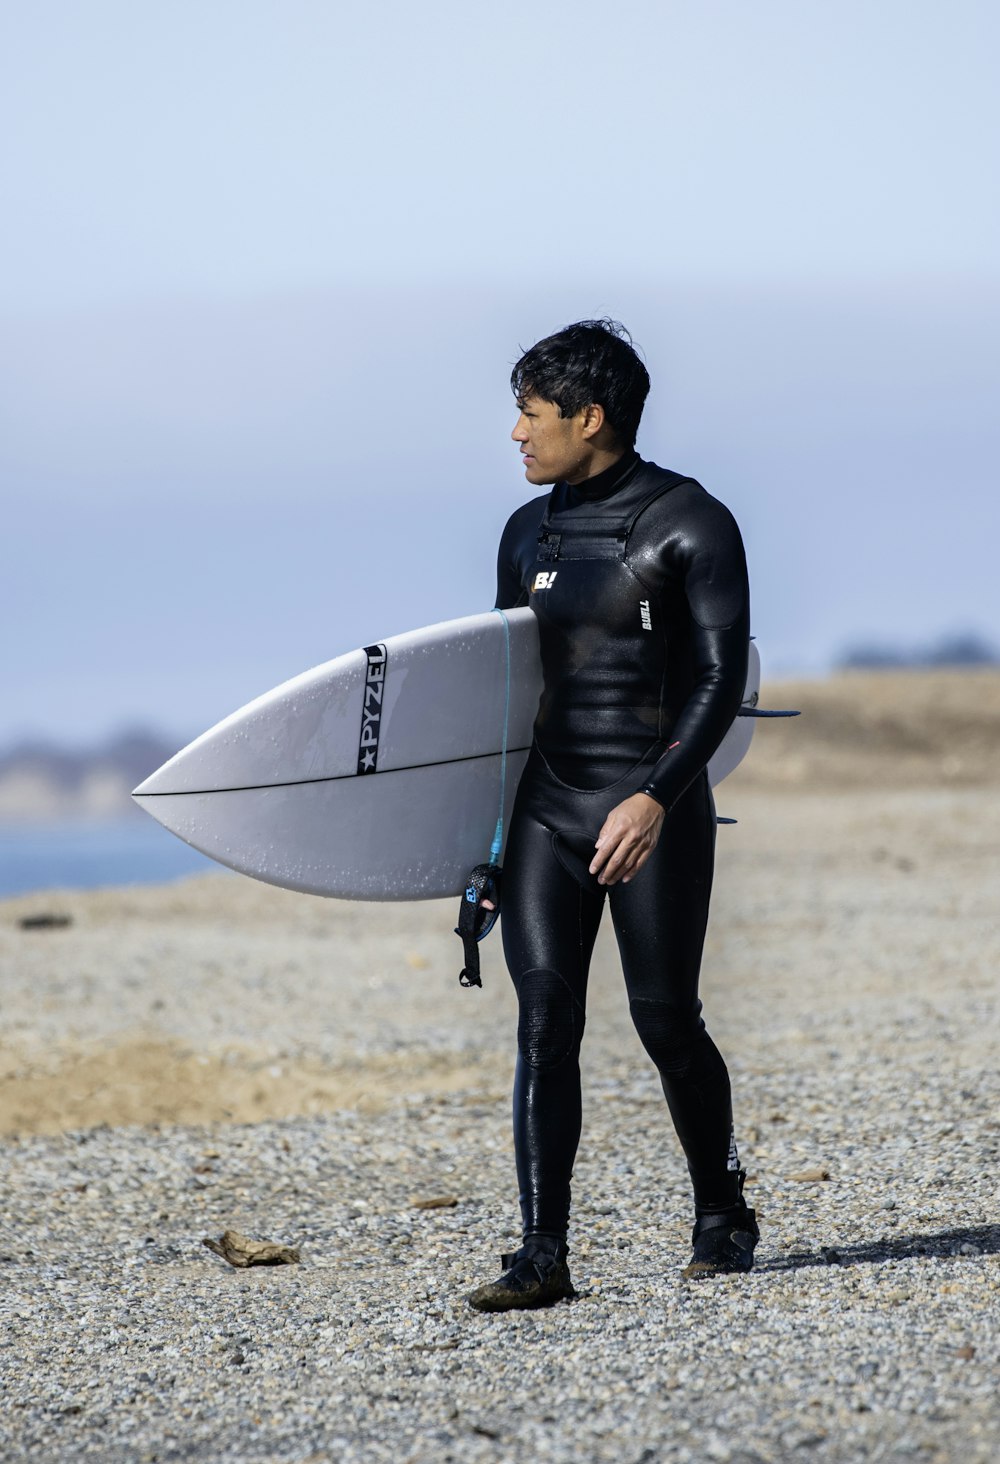 a man in a wet suit holding a surfboard